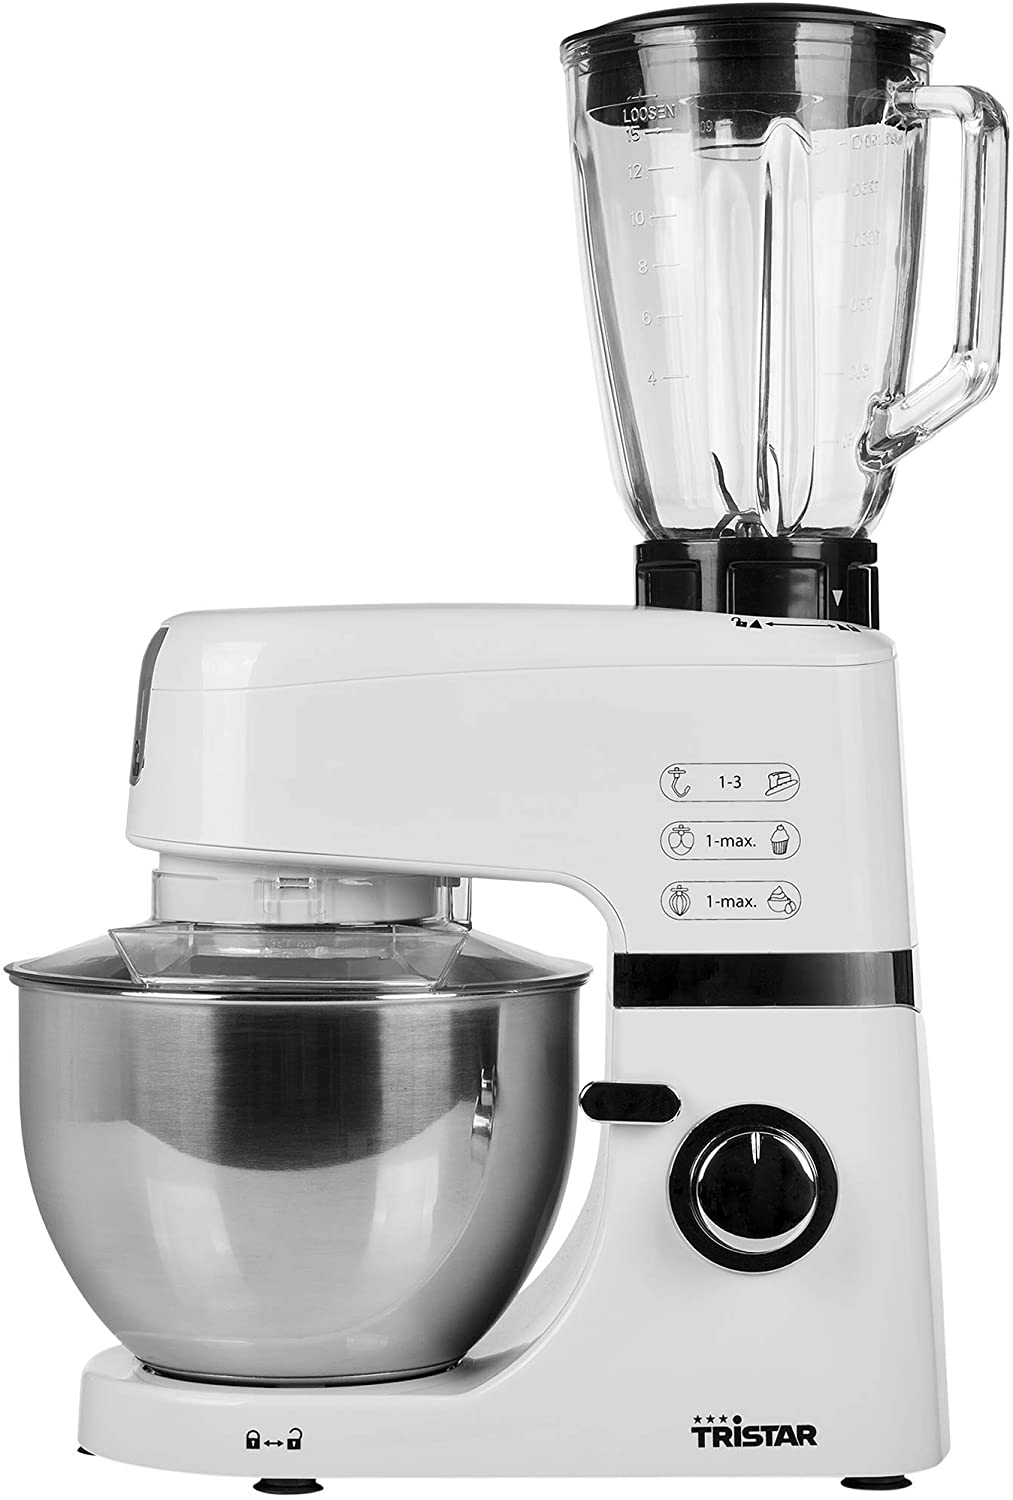 Tristar MX-4198 Food Processor with Jug Mixer, 700 W, 1.5 Litres, Stainless Steel, 6 Speeds Black